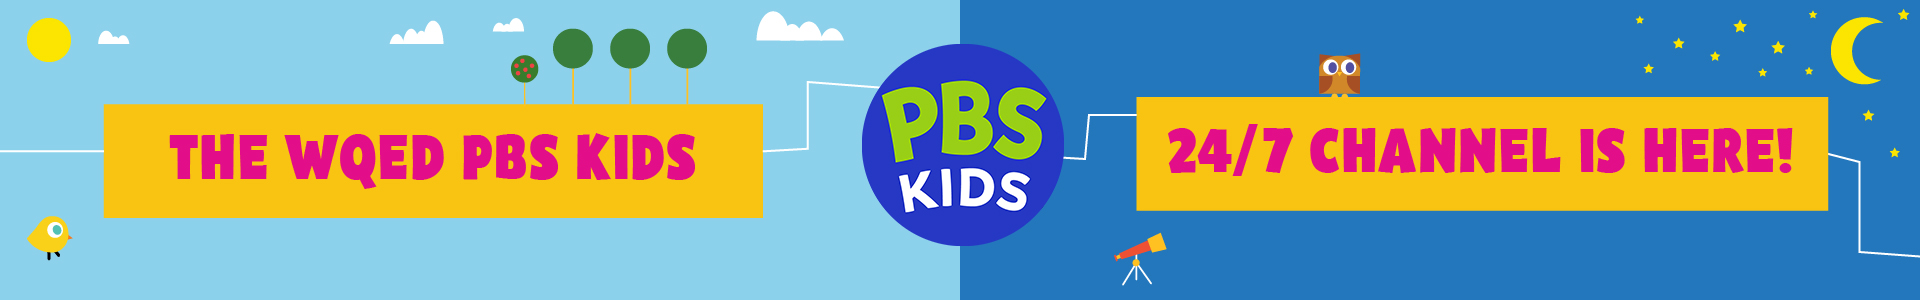 Click here to stream the WQED PBS Kids 24/7 channel